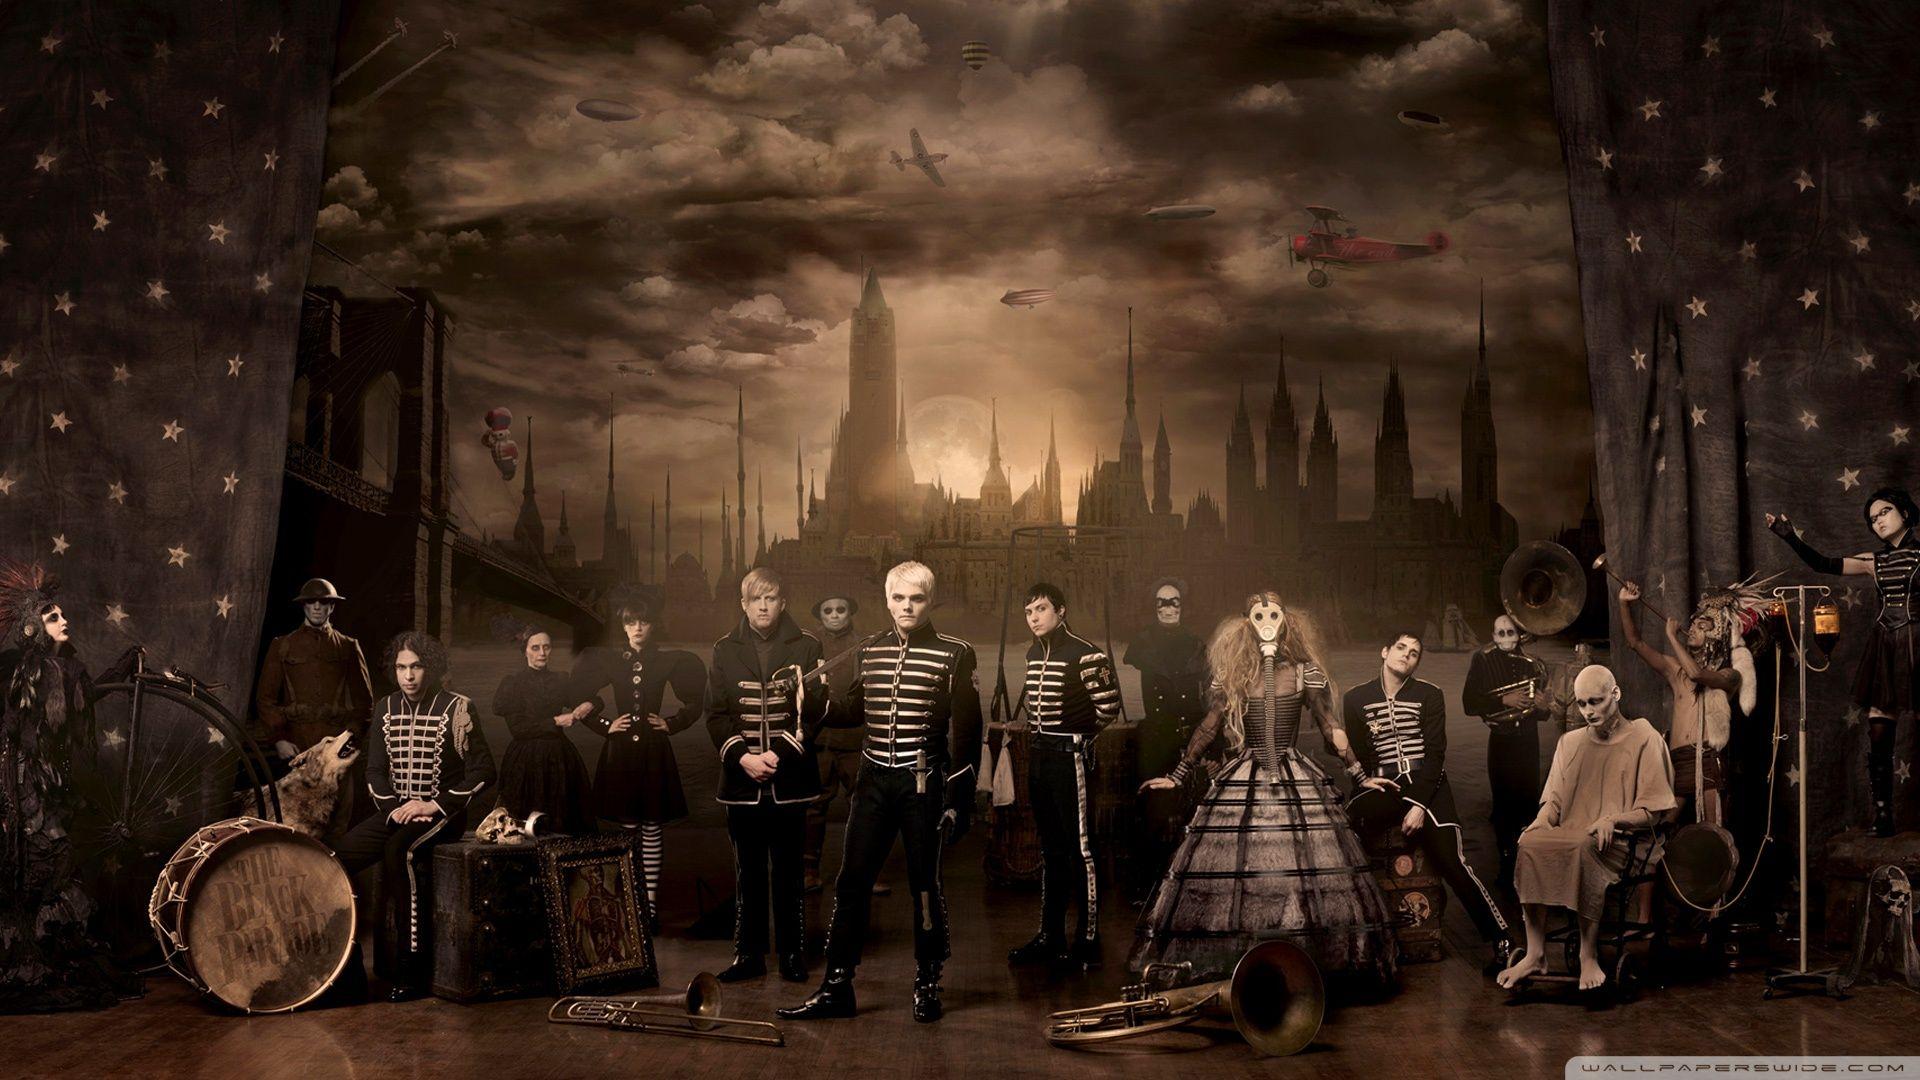 My Chemical Romance Wallpapers Black Parade Wallpaper Cave